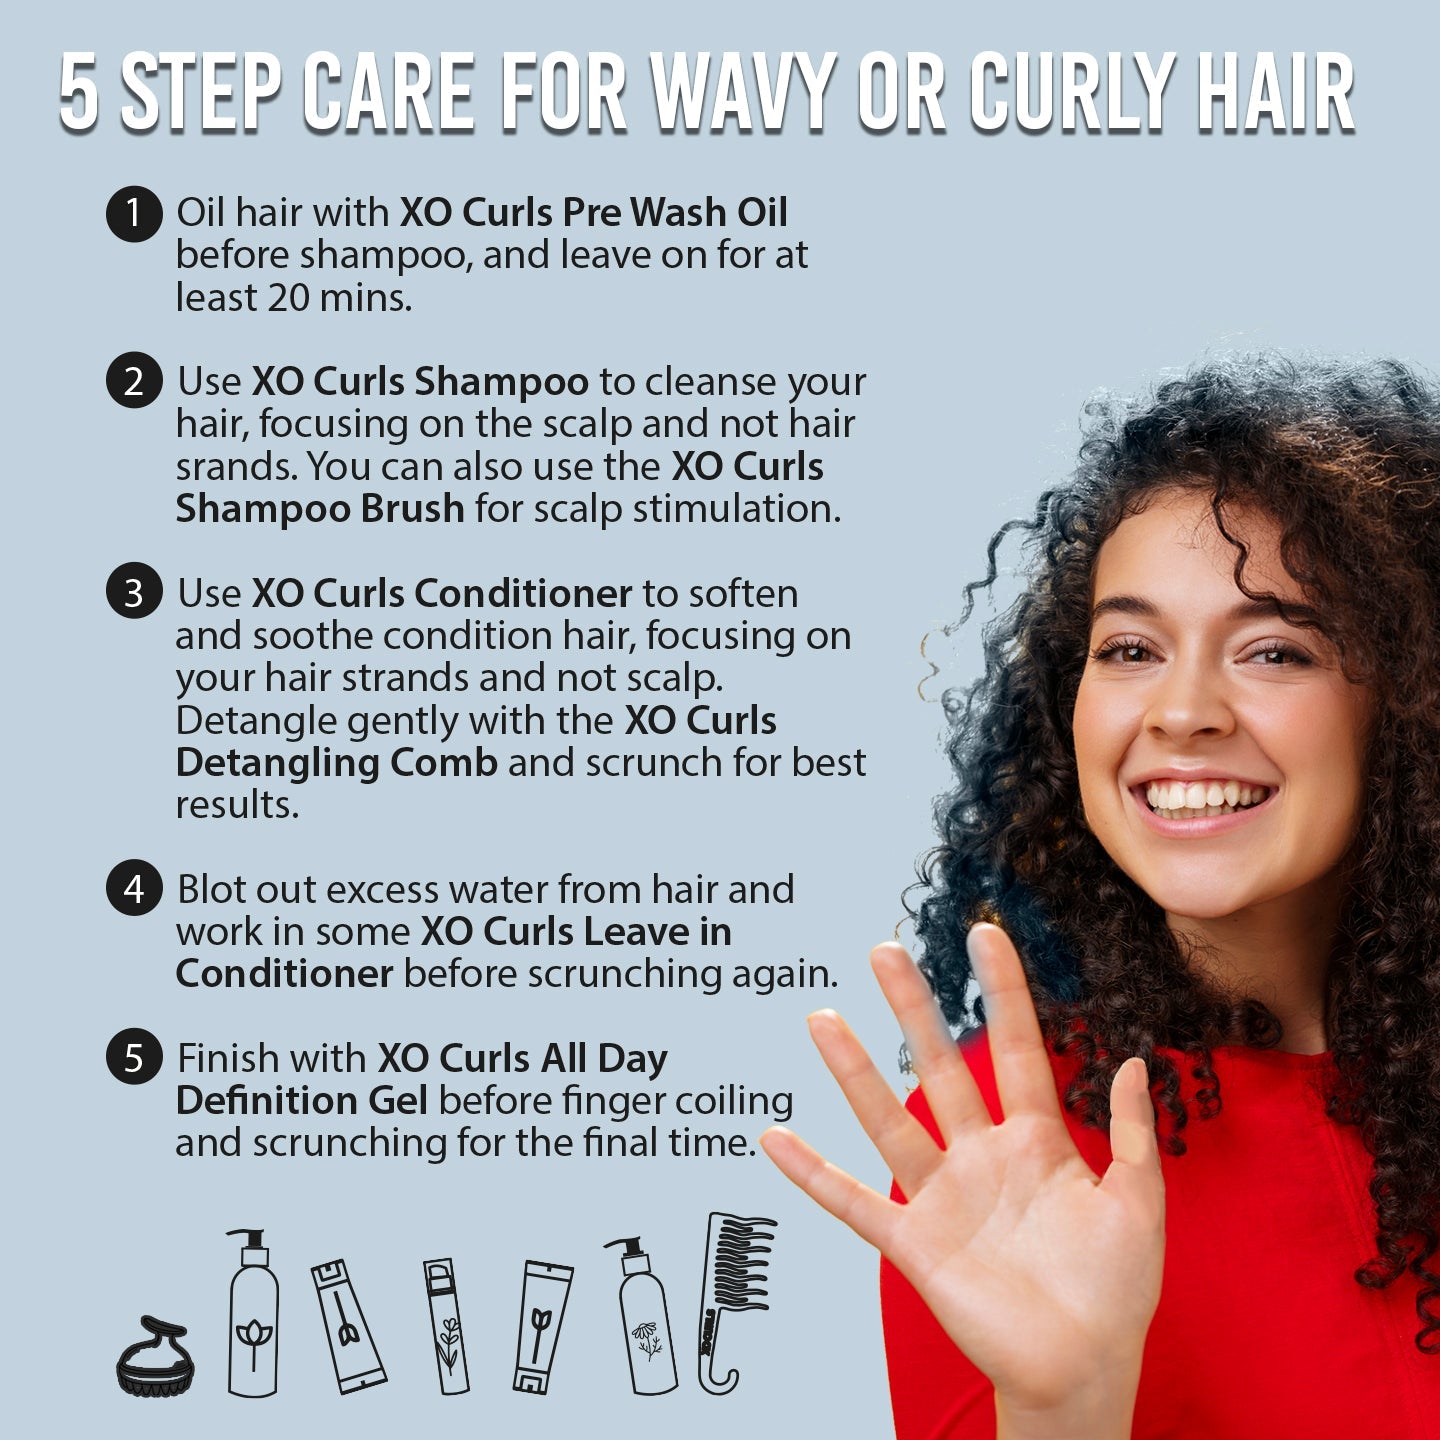 6 Piece combo for complete hair care